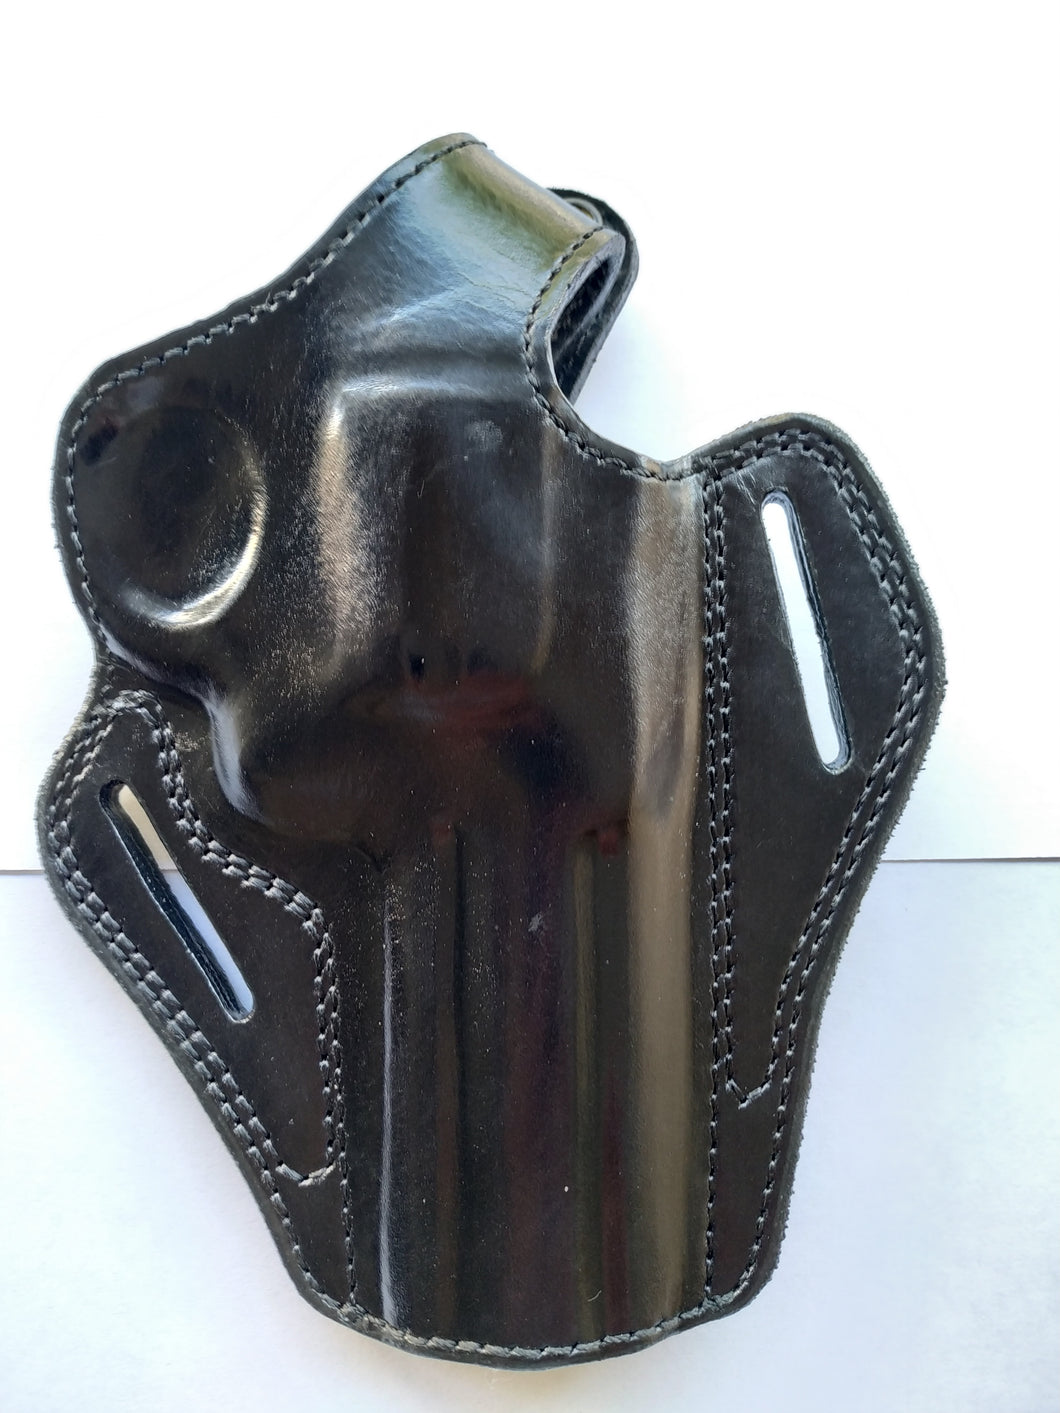 Leather Belt owb Holster For Smith and  Wesson 686 4 inch barrel